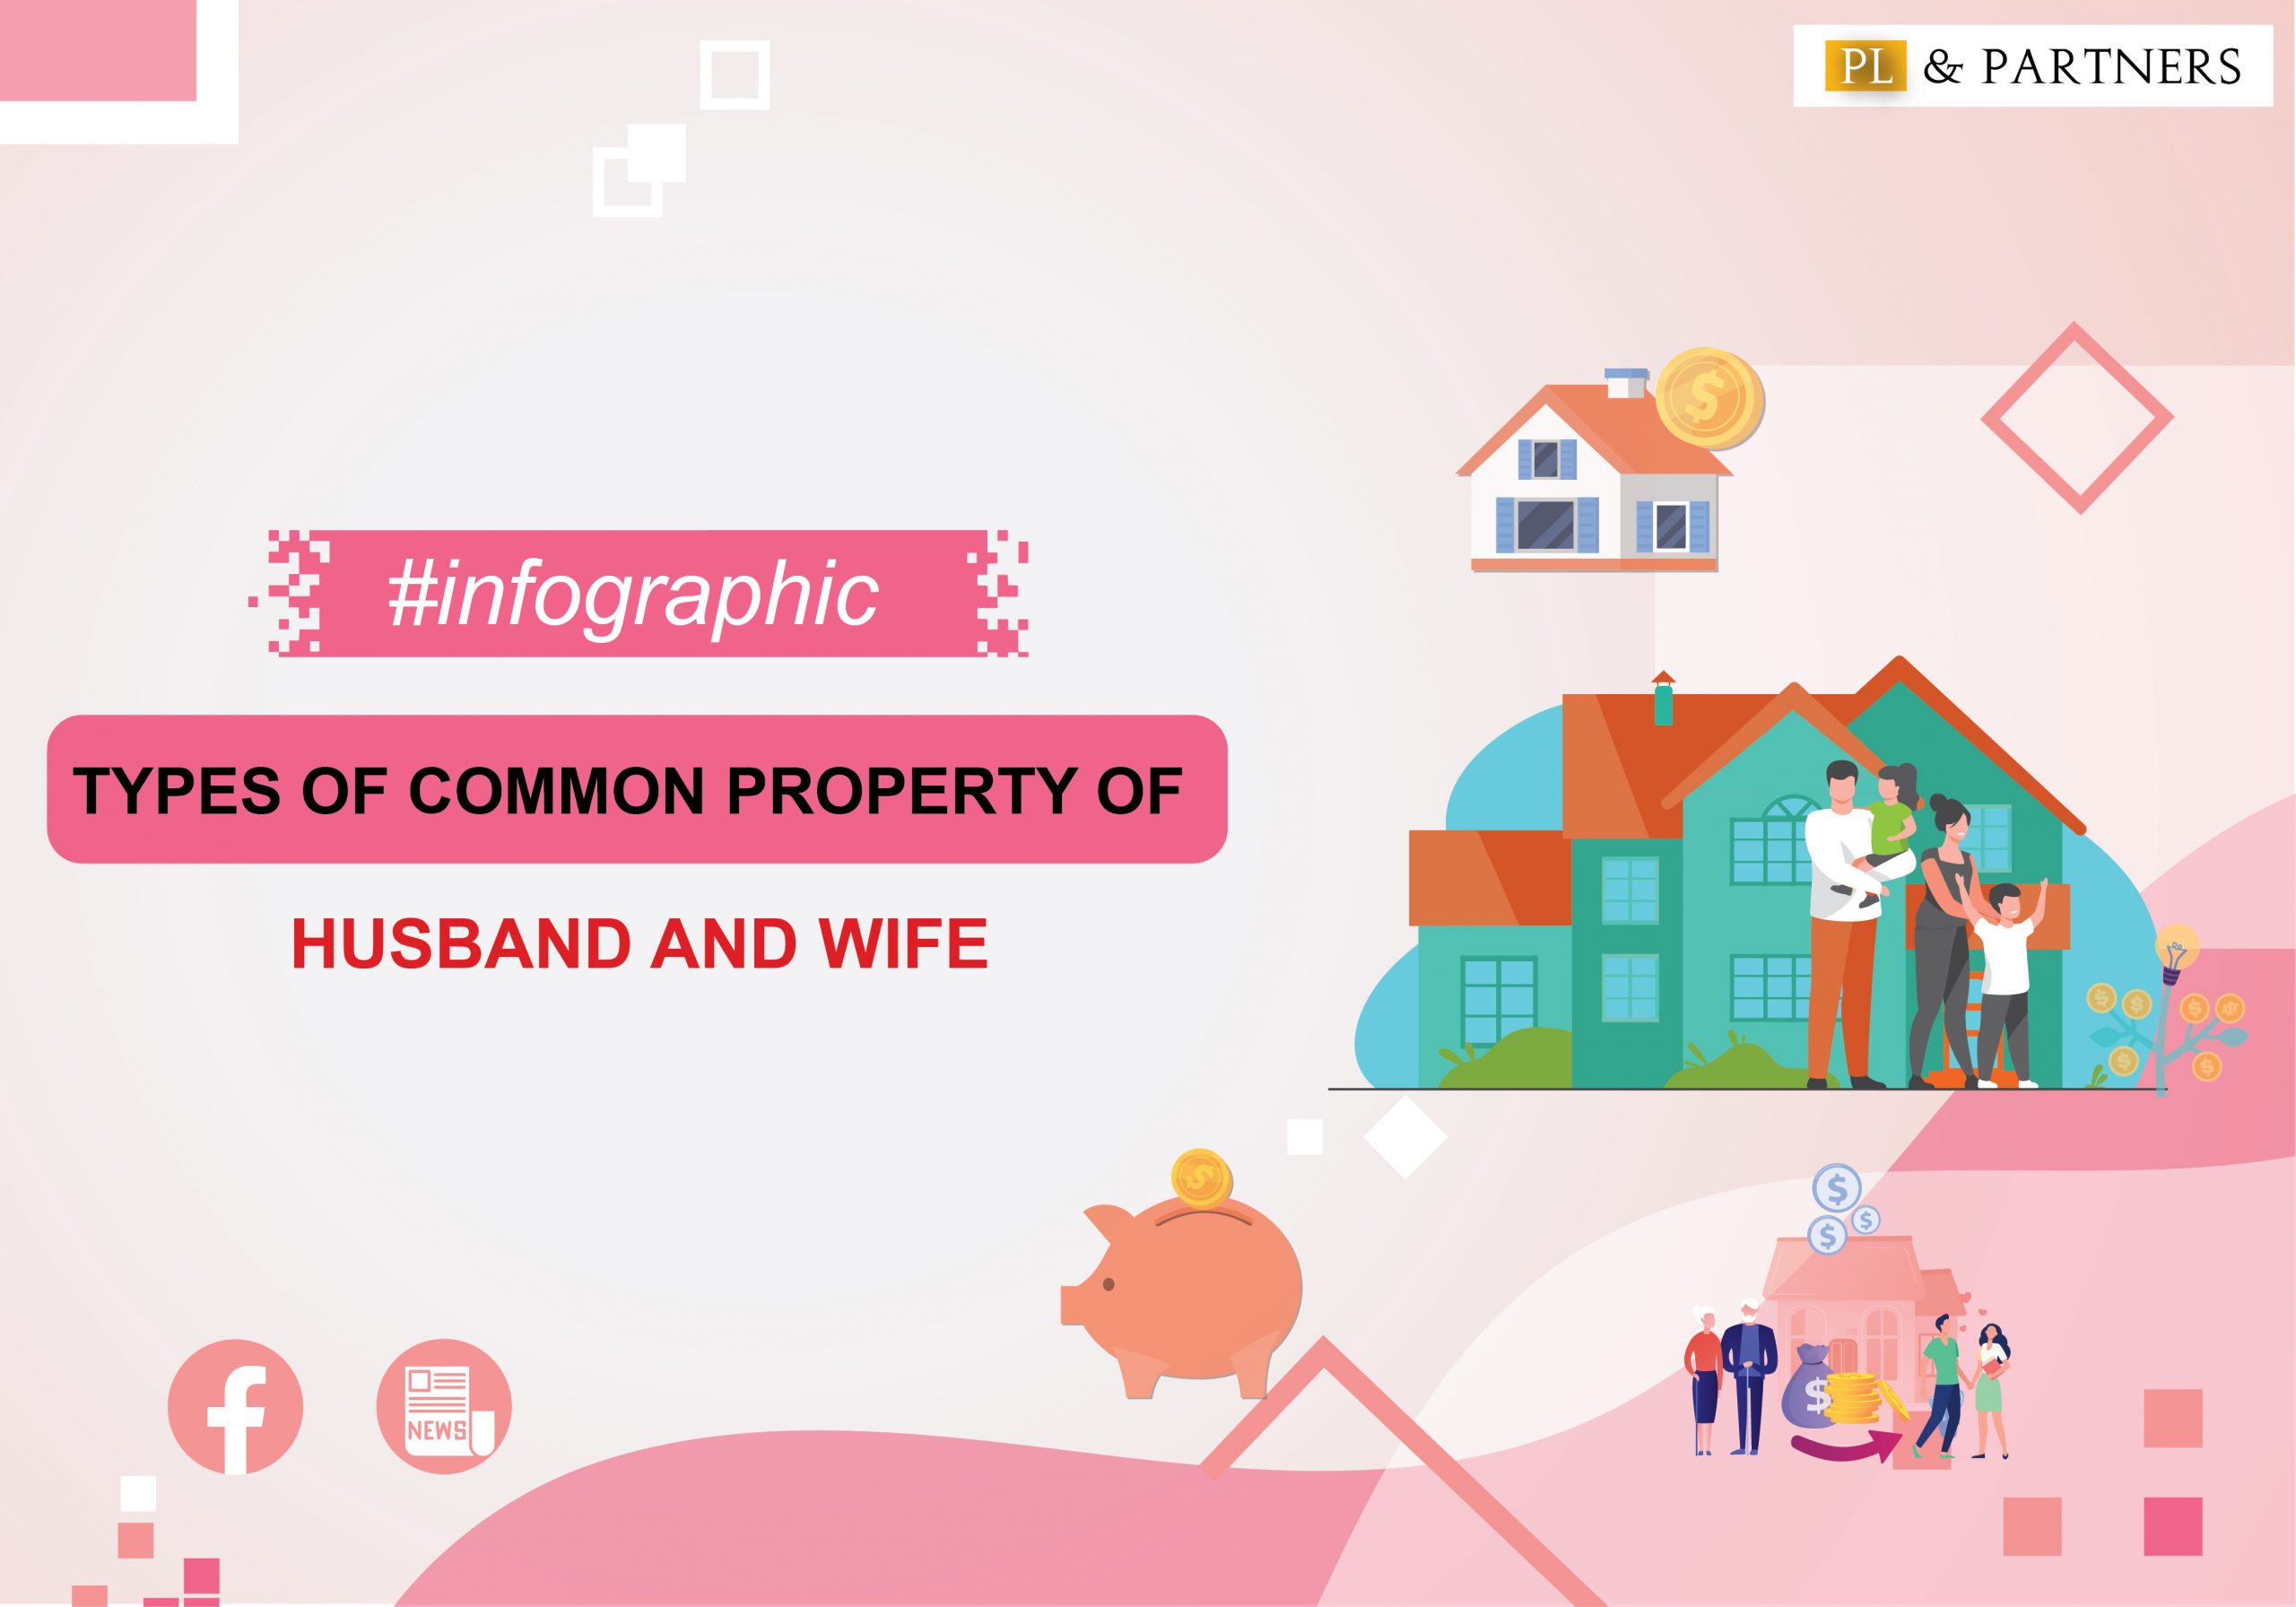 Types of common property of husband and wife